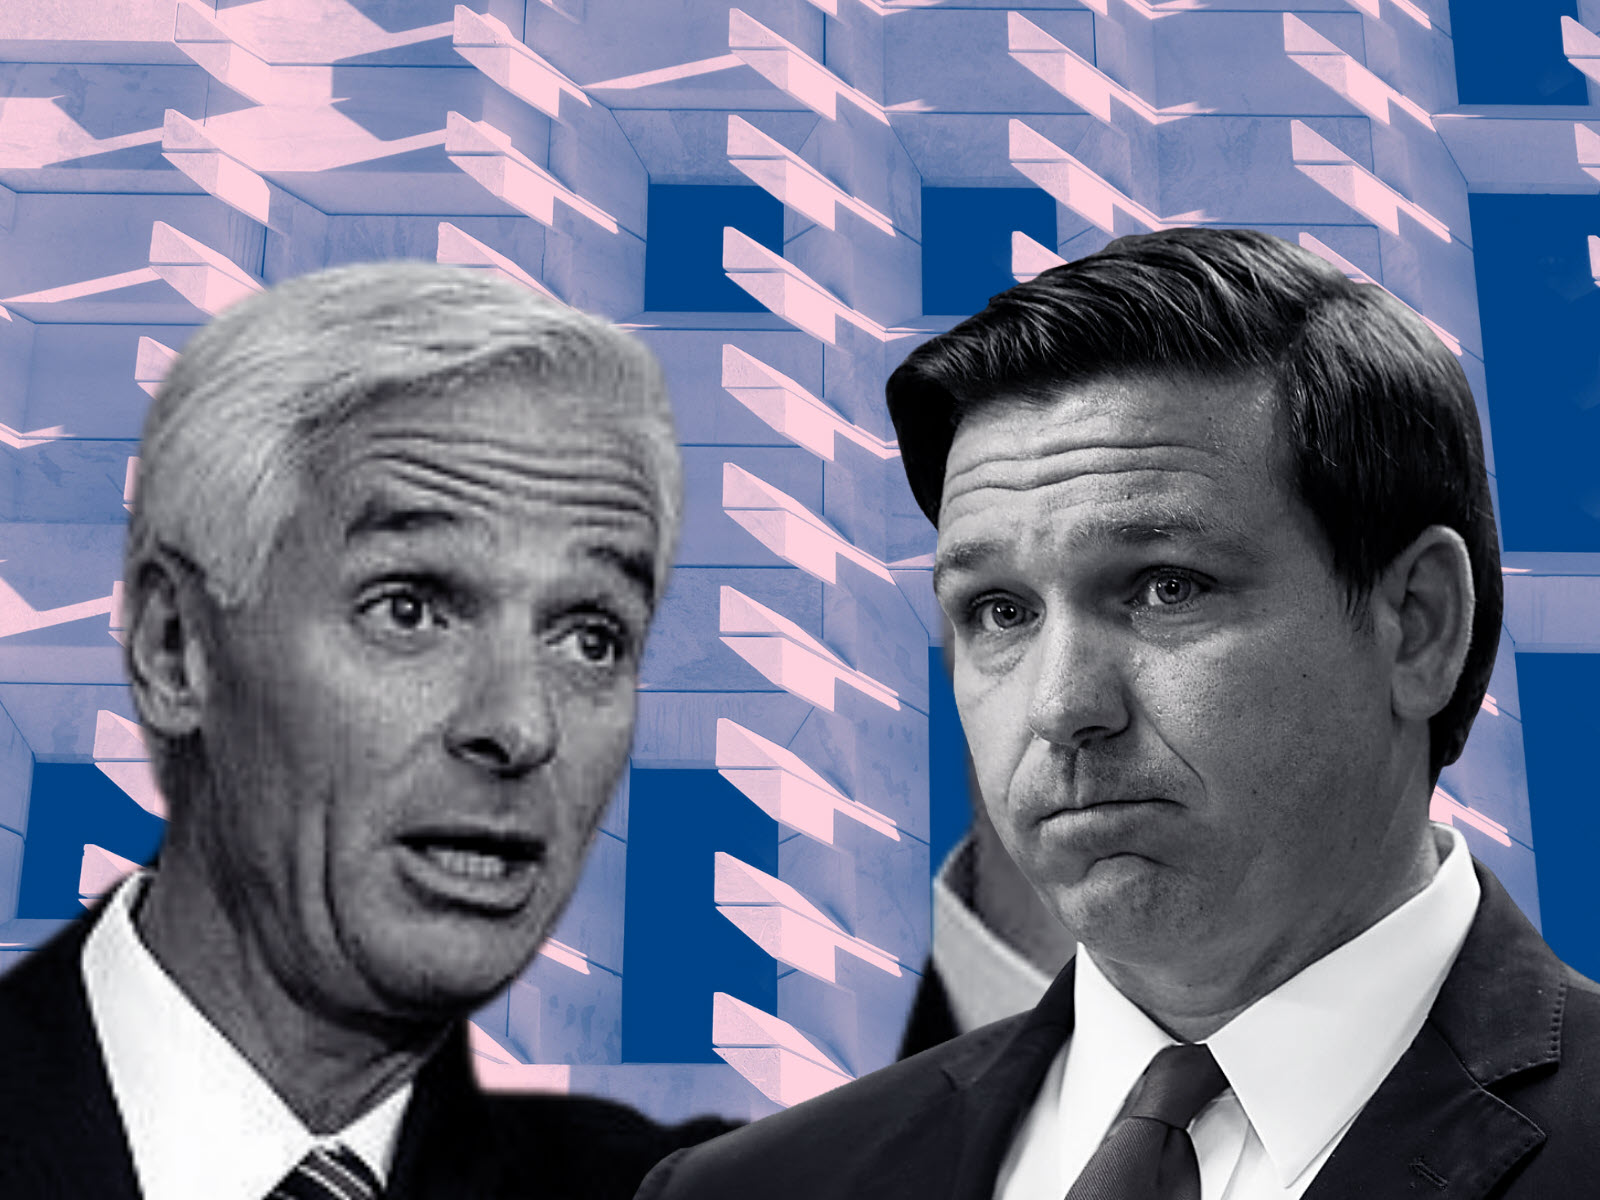 'It's wrong': Charlie Crist blasts Gov. DeSantis, PSC for punting on utility rate hikes until after the election